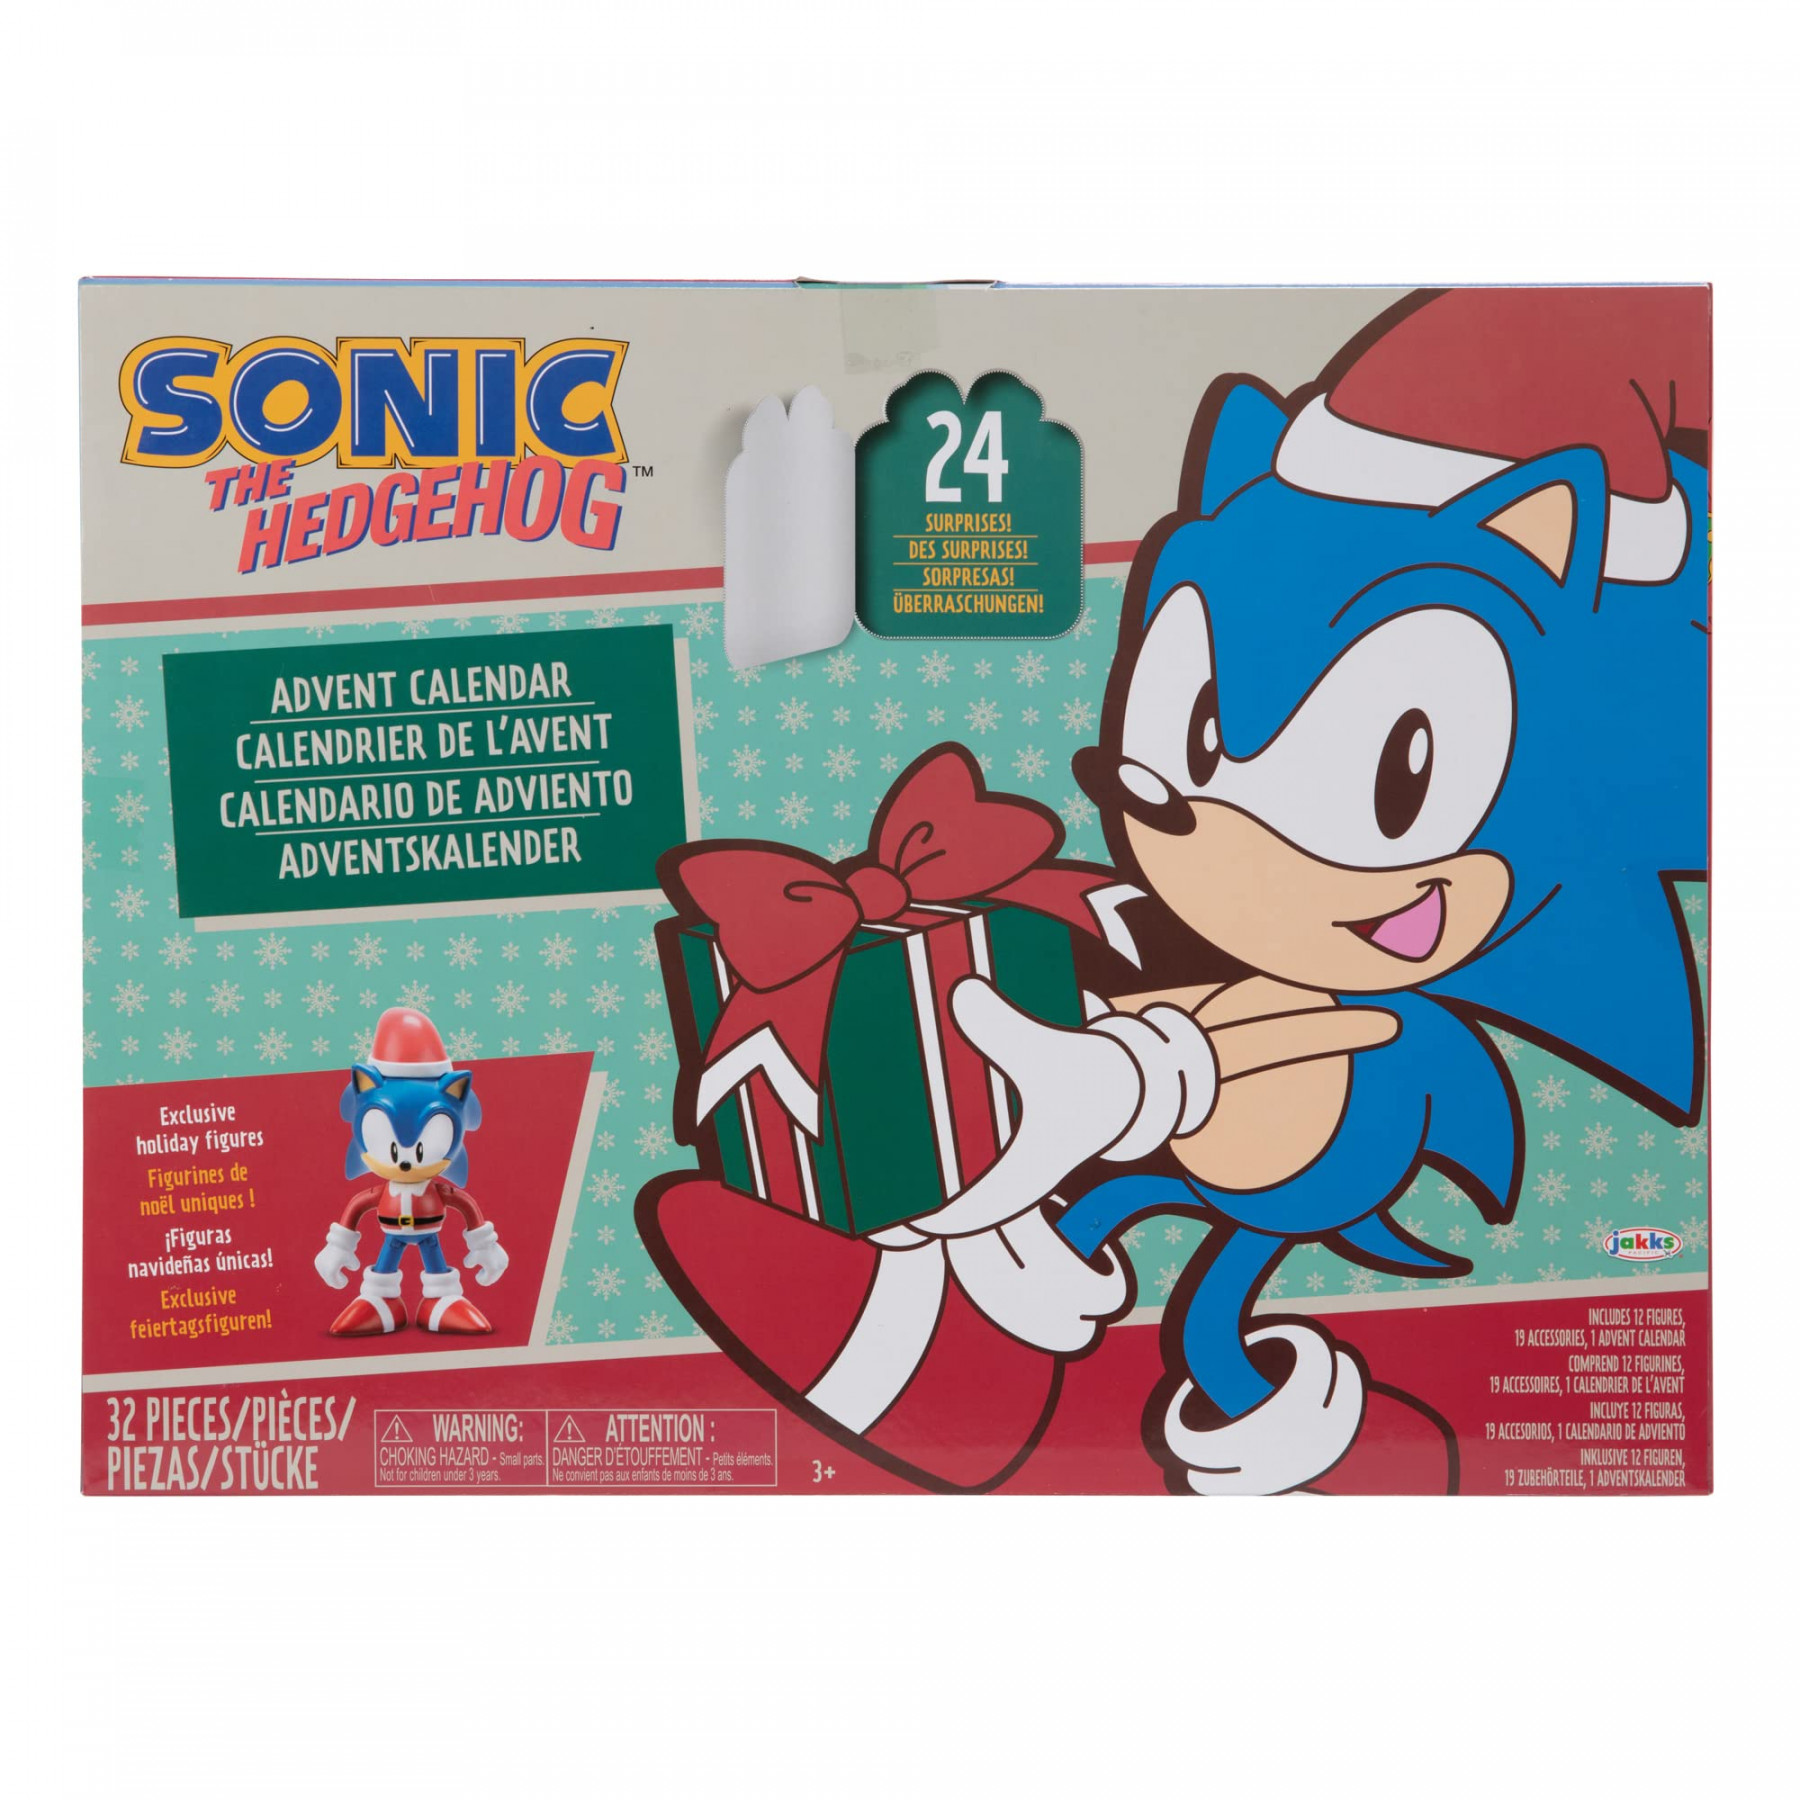 Sonic The Hedgehog Advent Calendar -  Surprises with Exclusive  Collectible